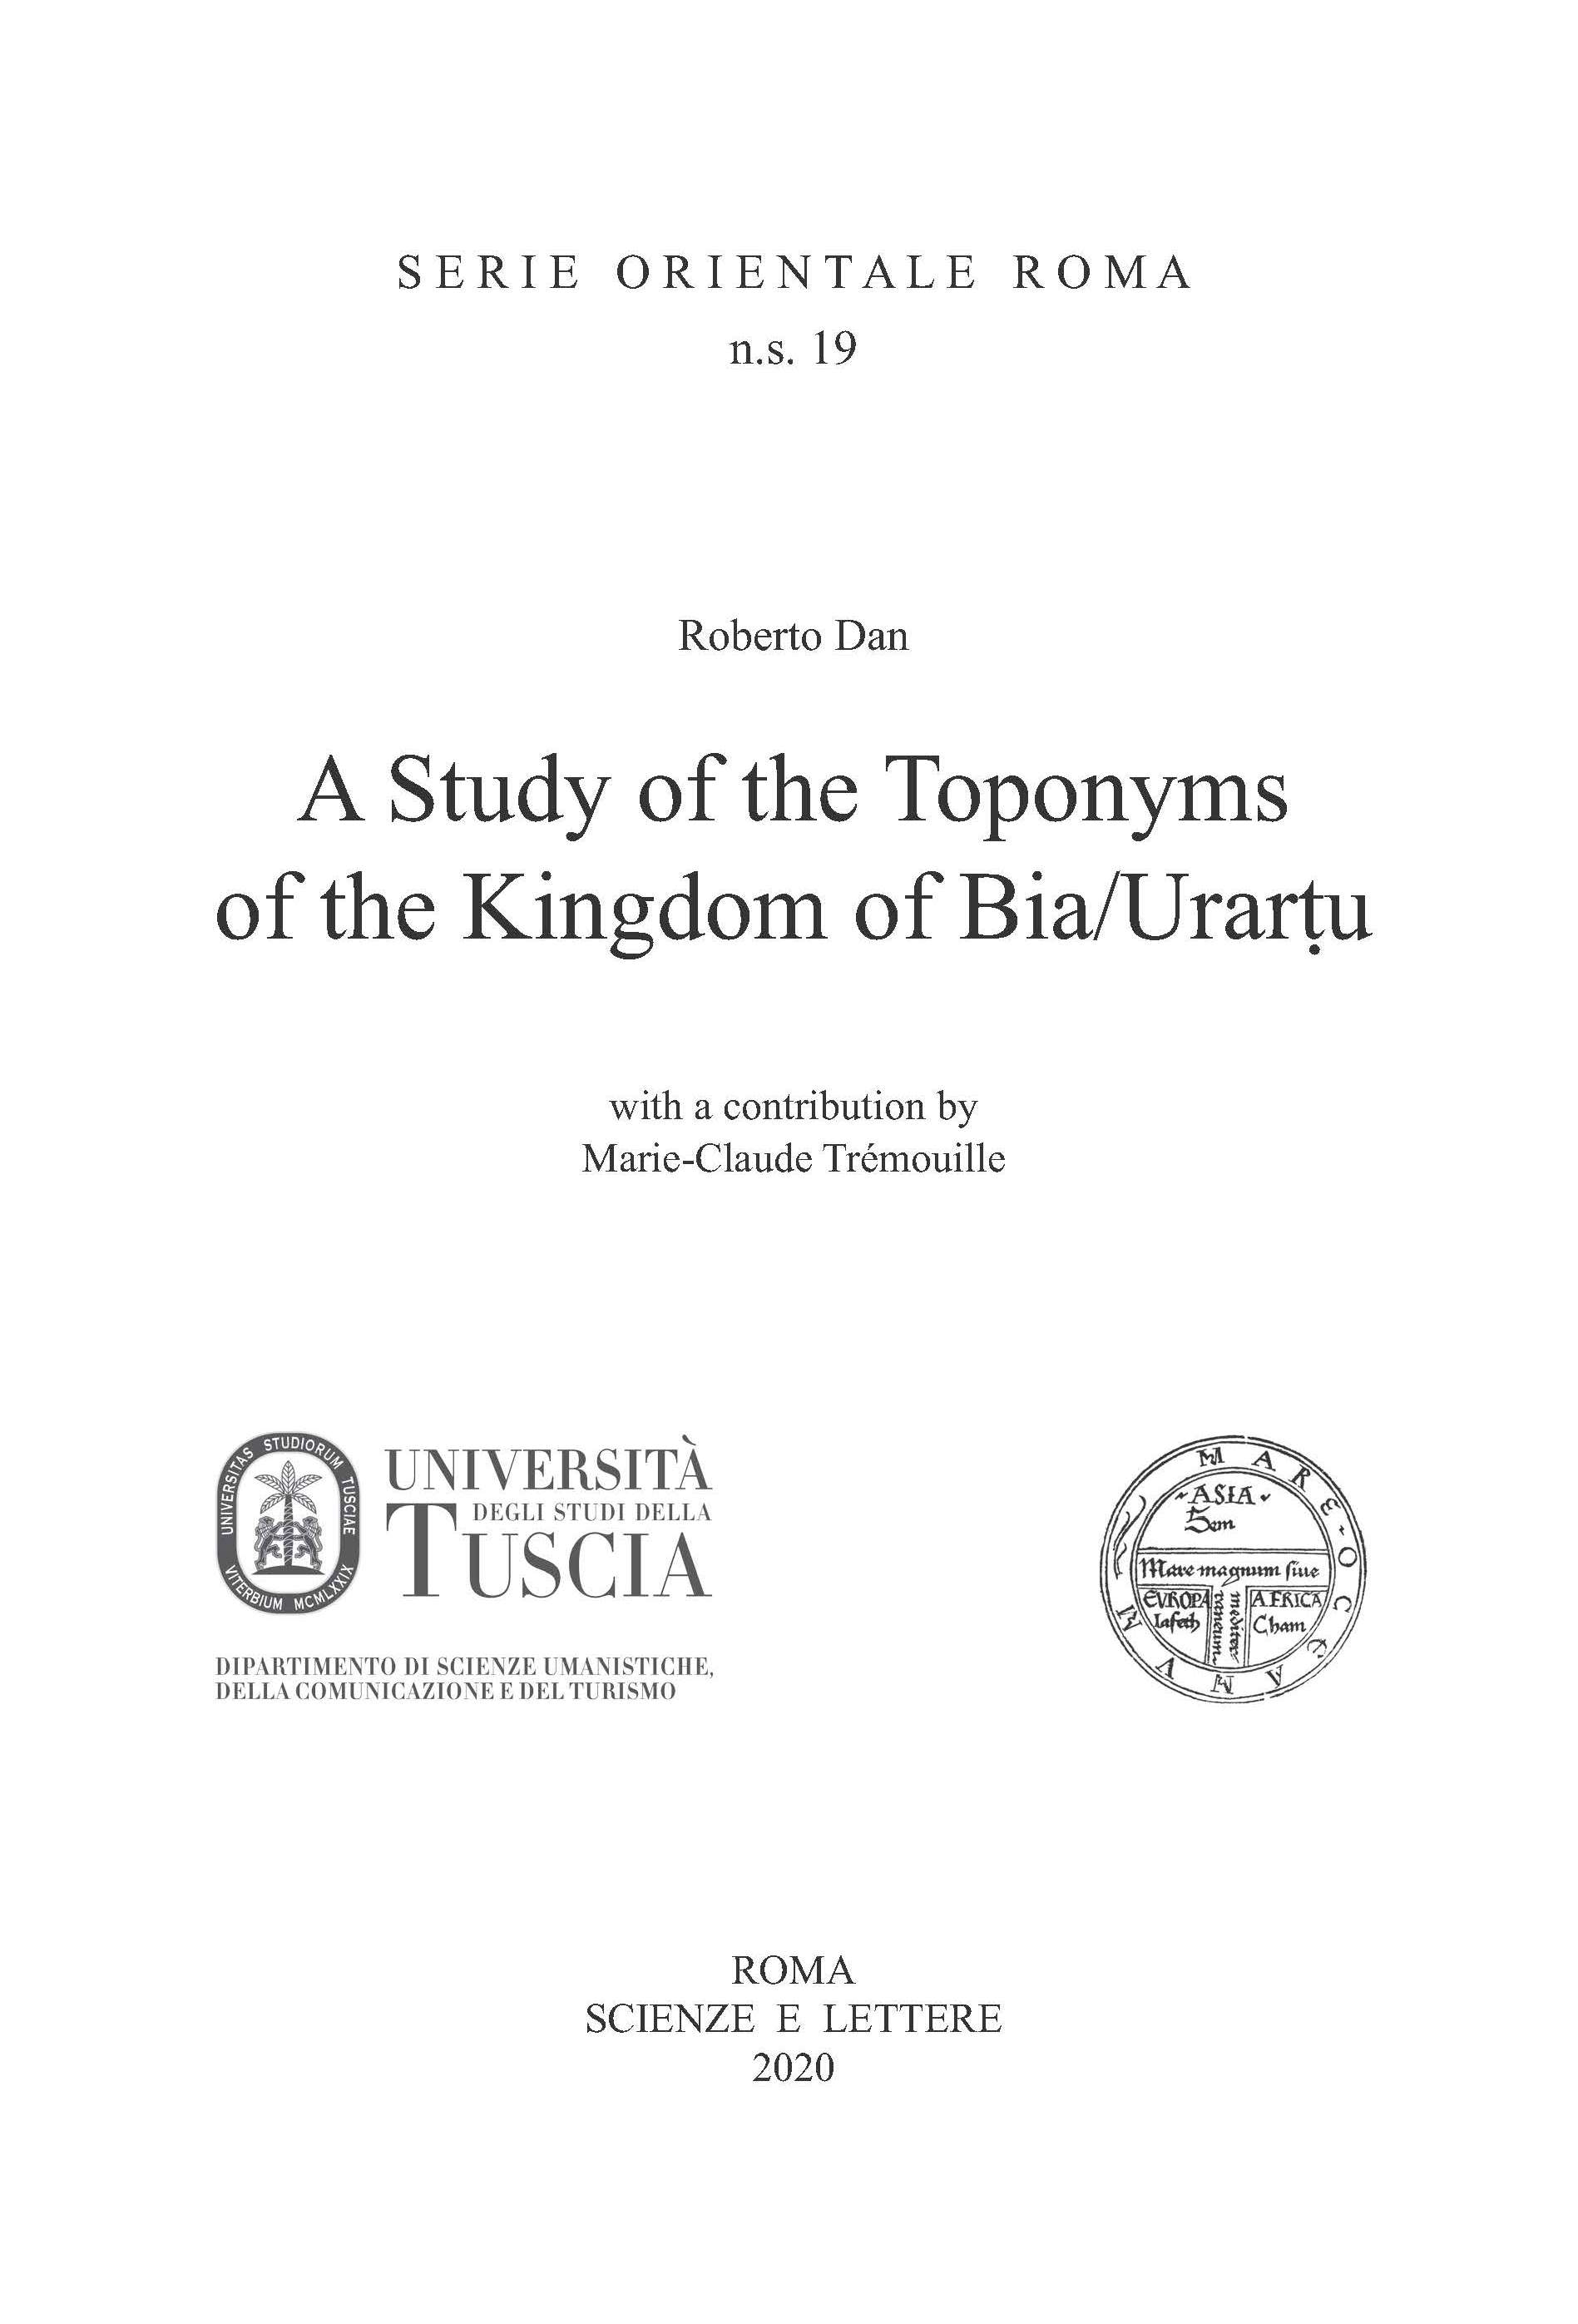 A Study of the Toponyms
of the Kingdom of Bia/Urartu - SERIE ORIENTALE ROMA n.s. 19